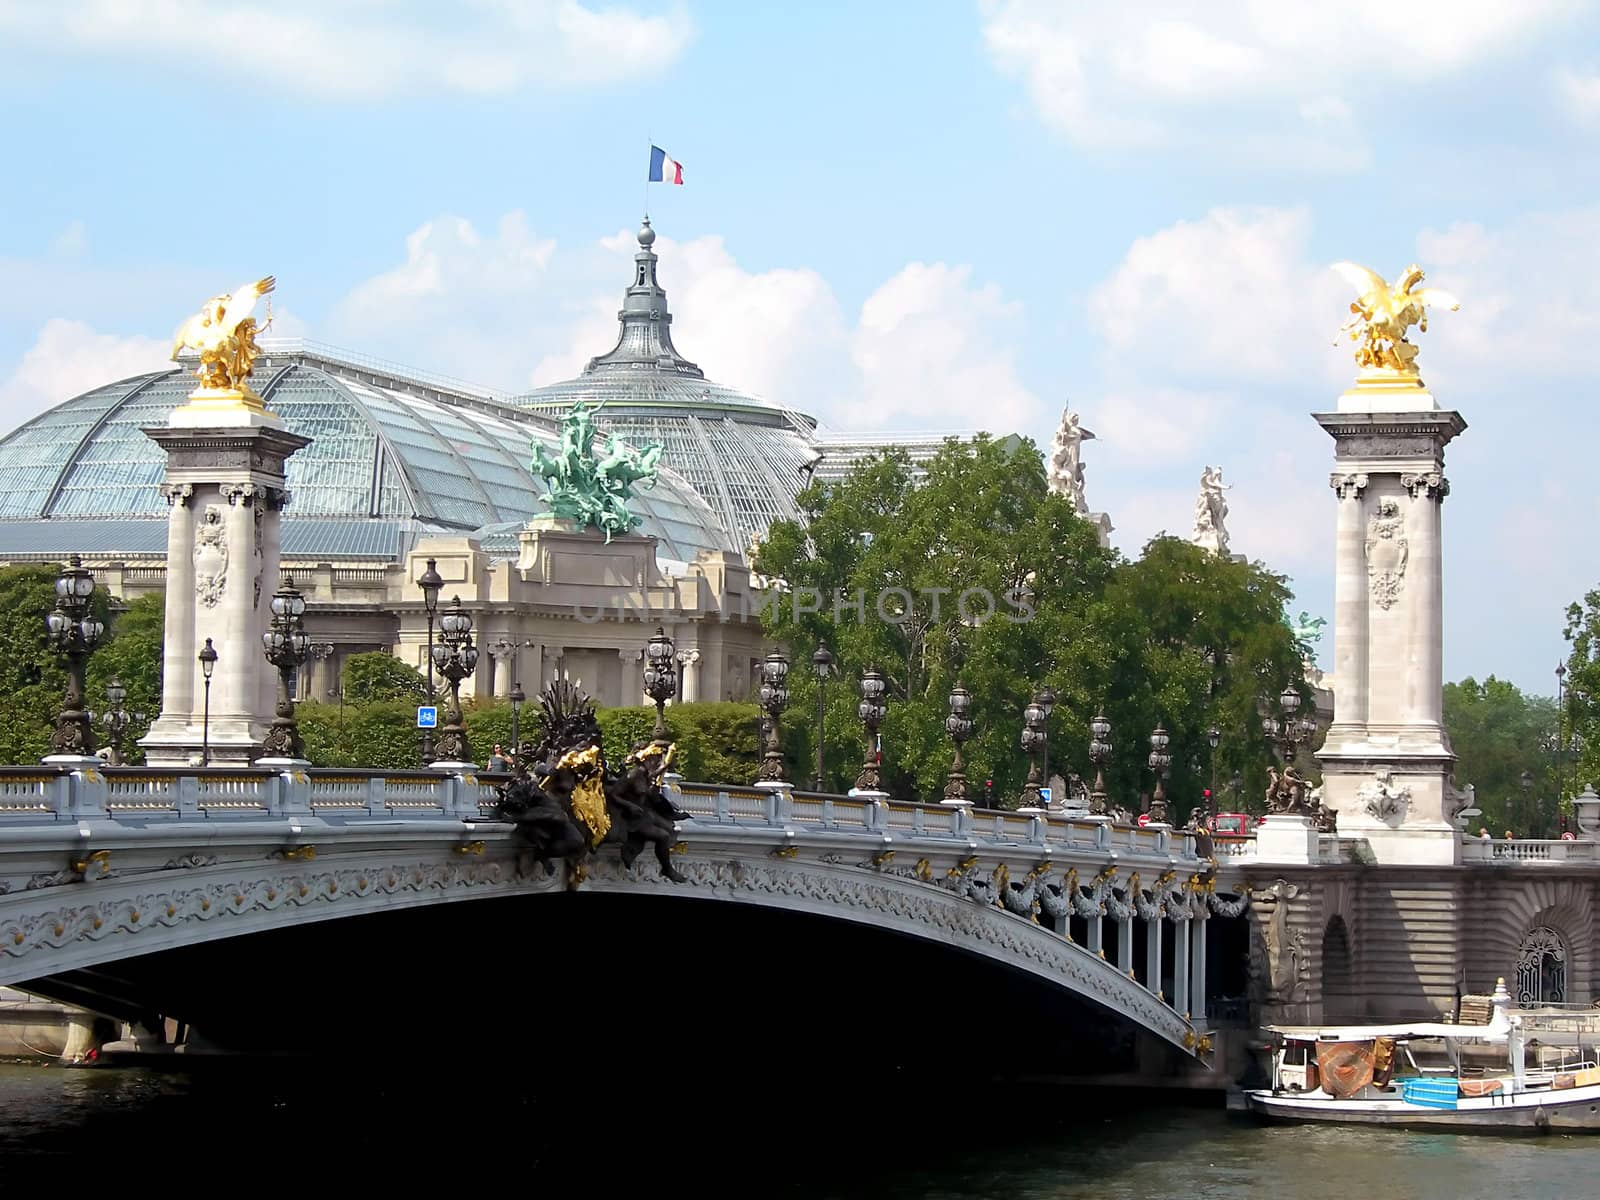 The New opera and a bridge in Paris  by drakodav